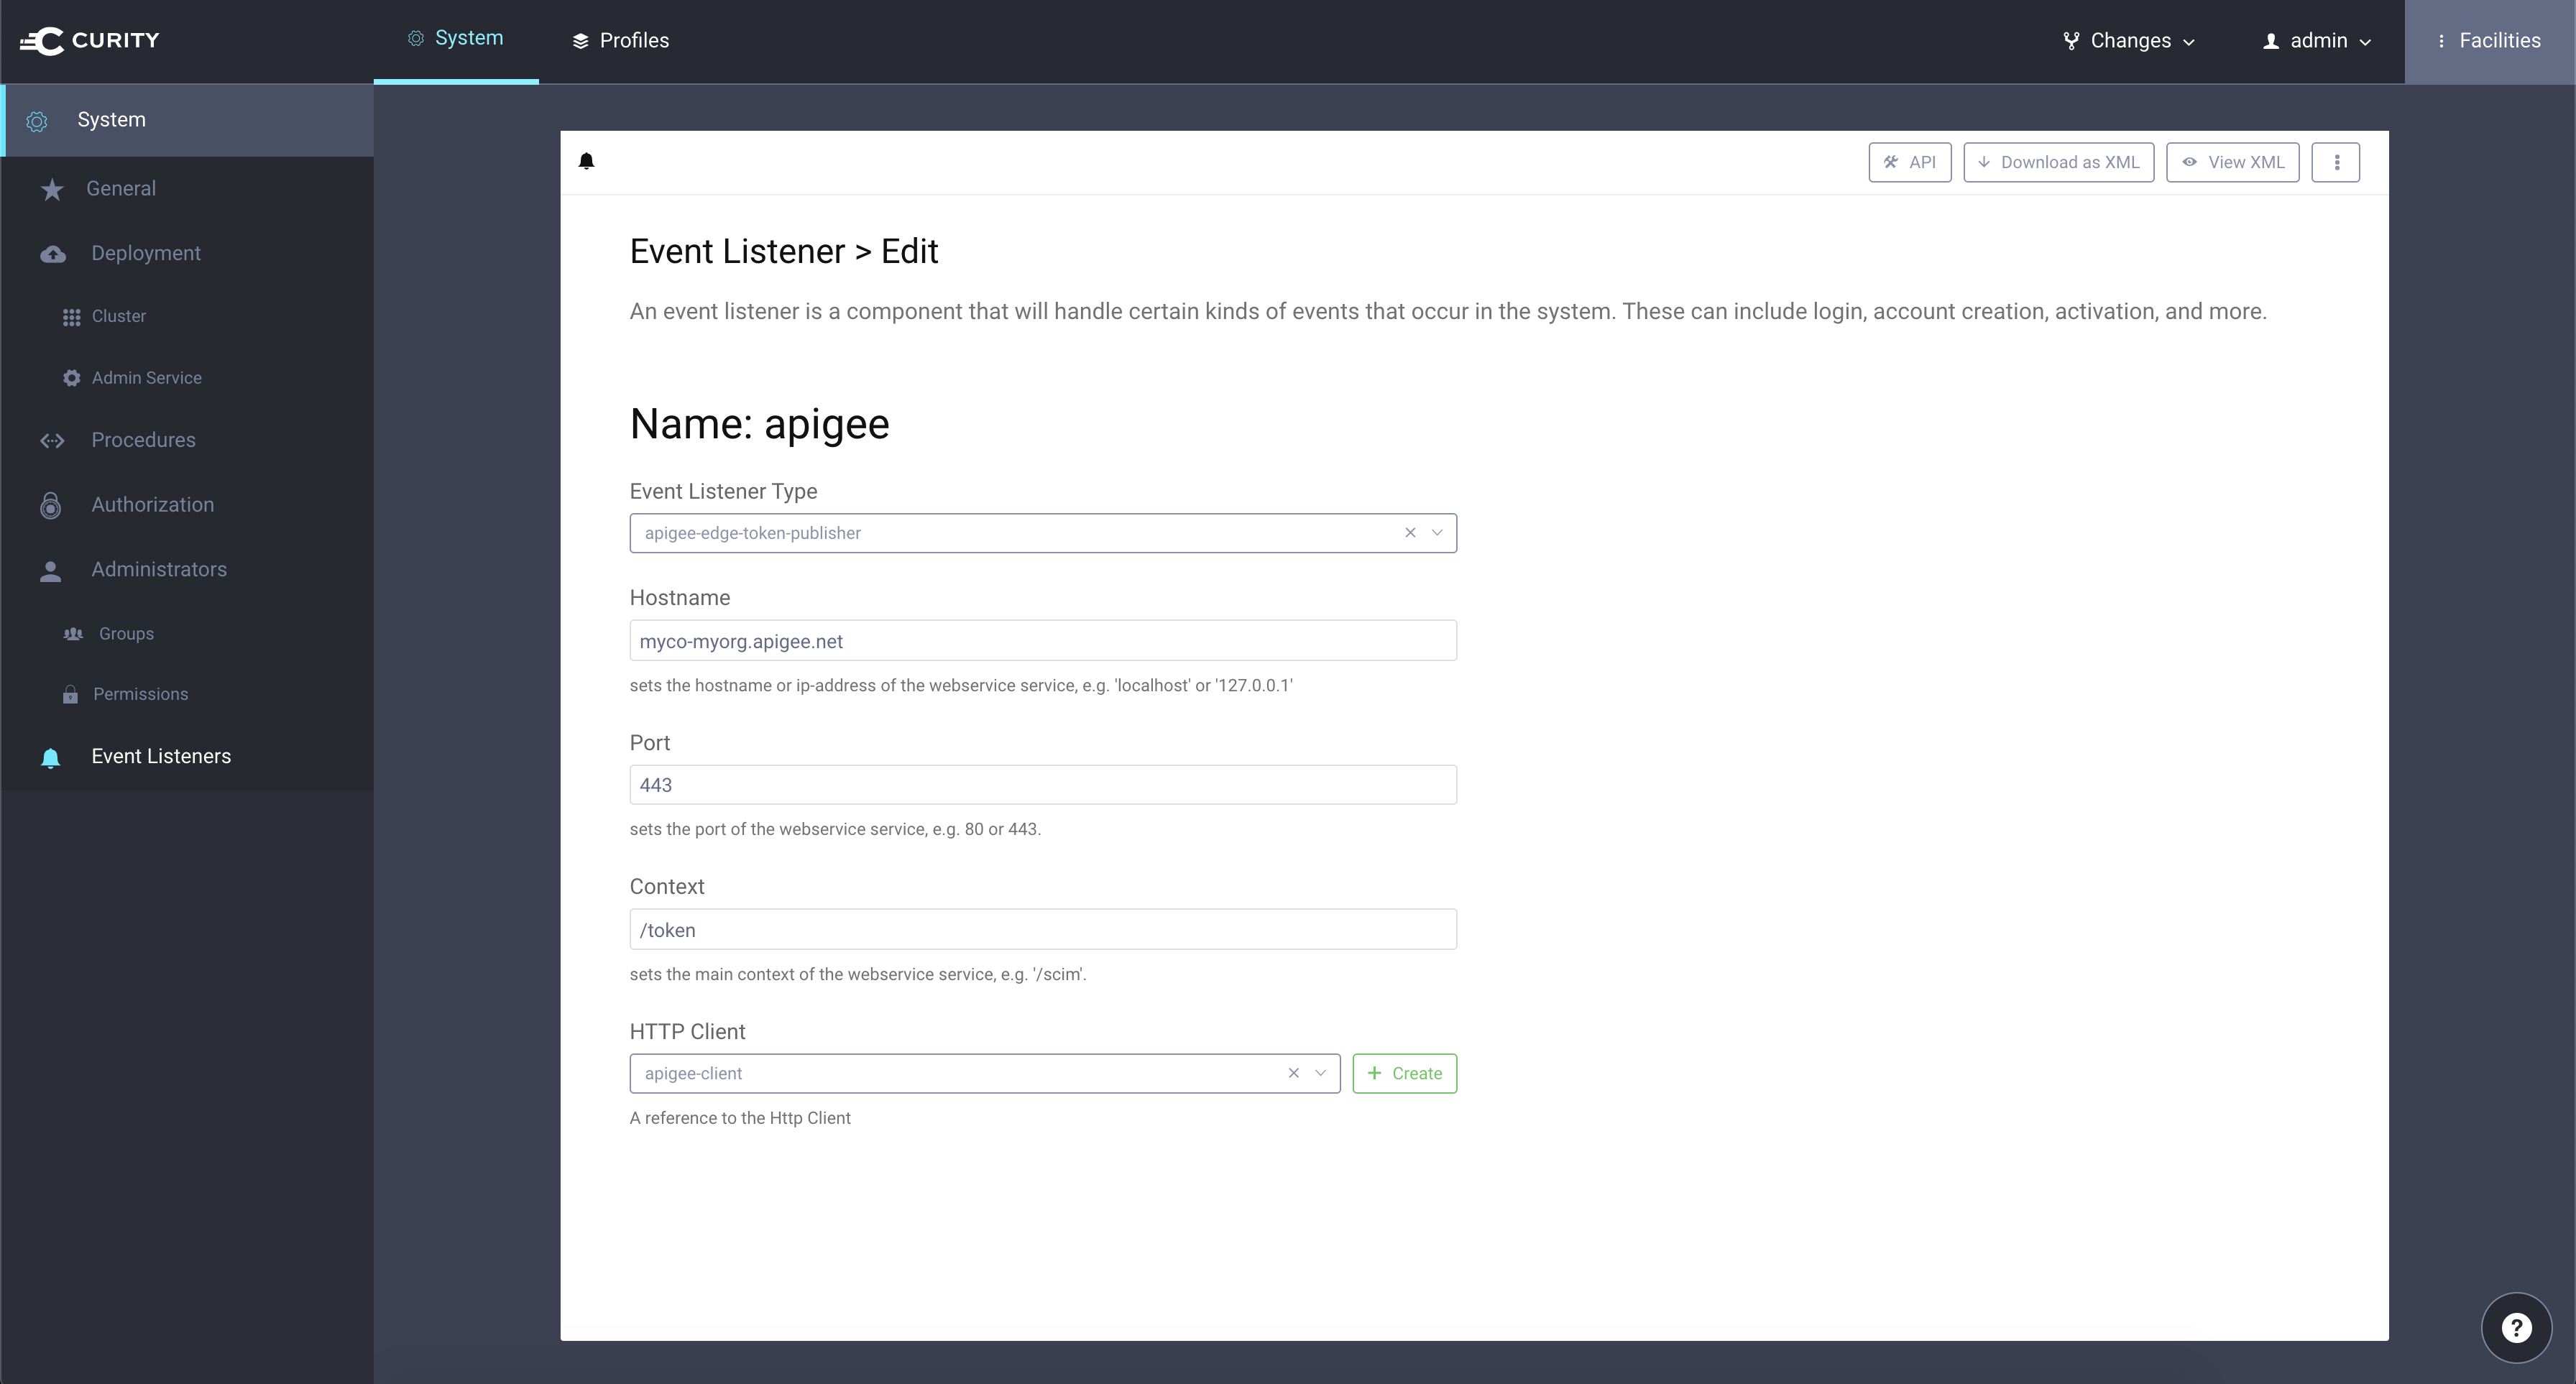 Configuring an Event Listener in the Curity Admin UI